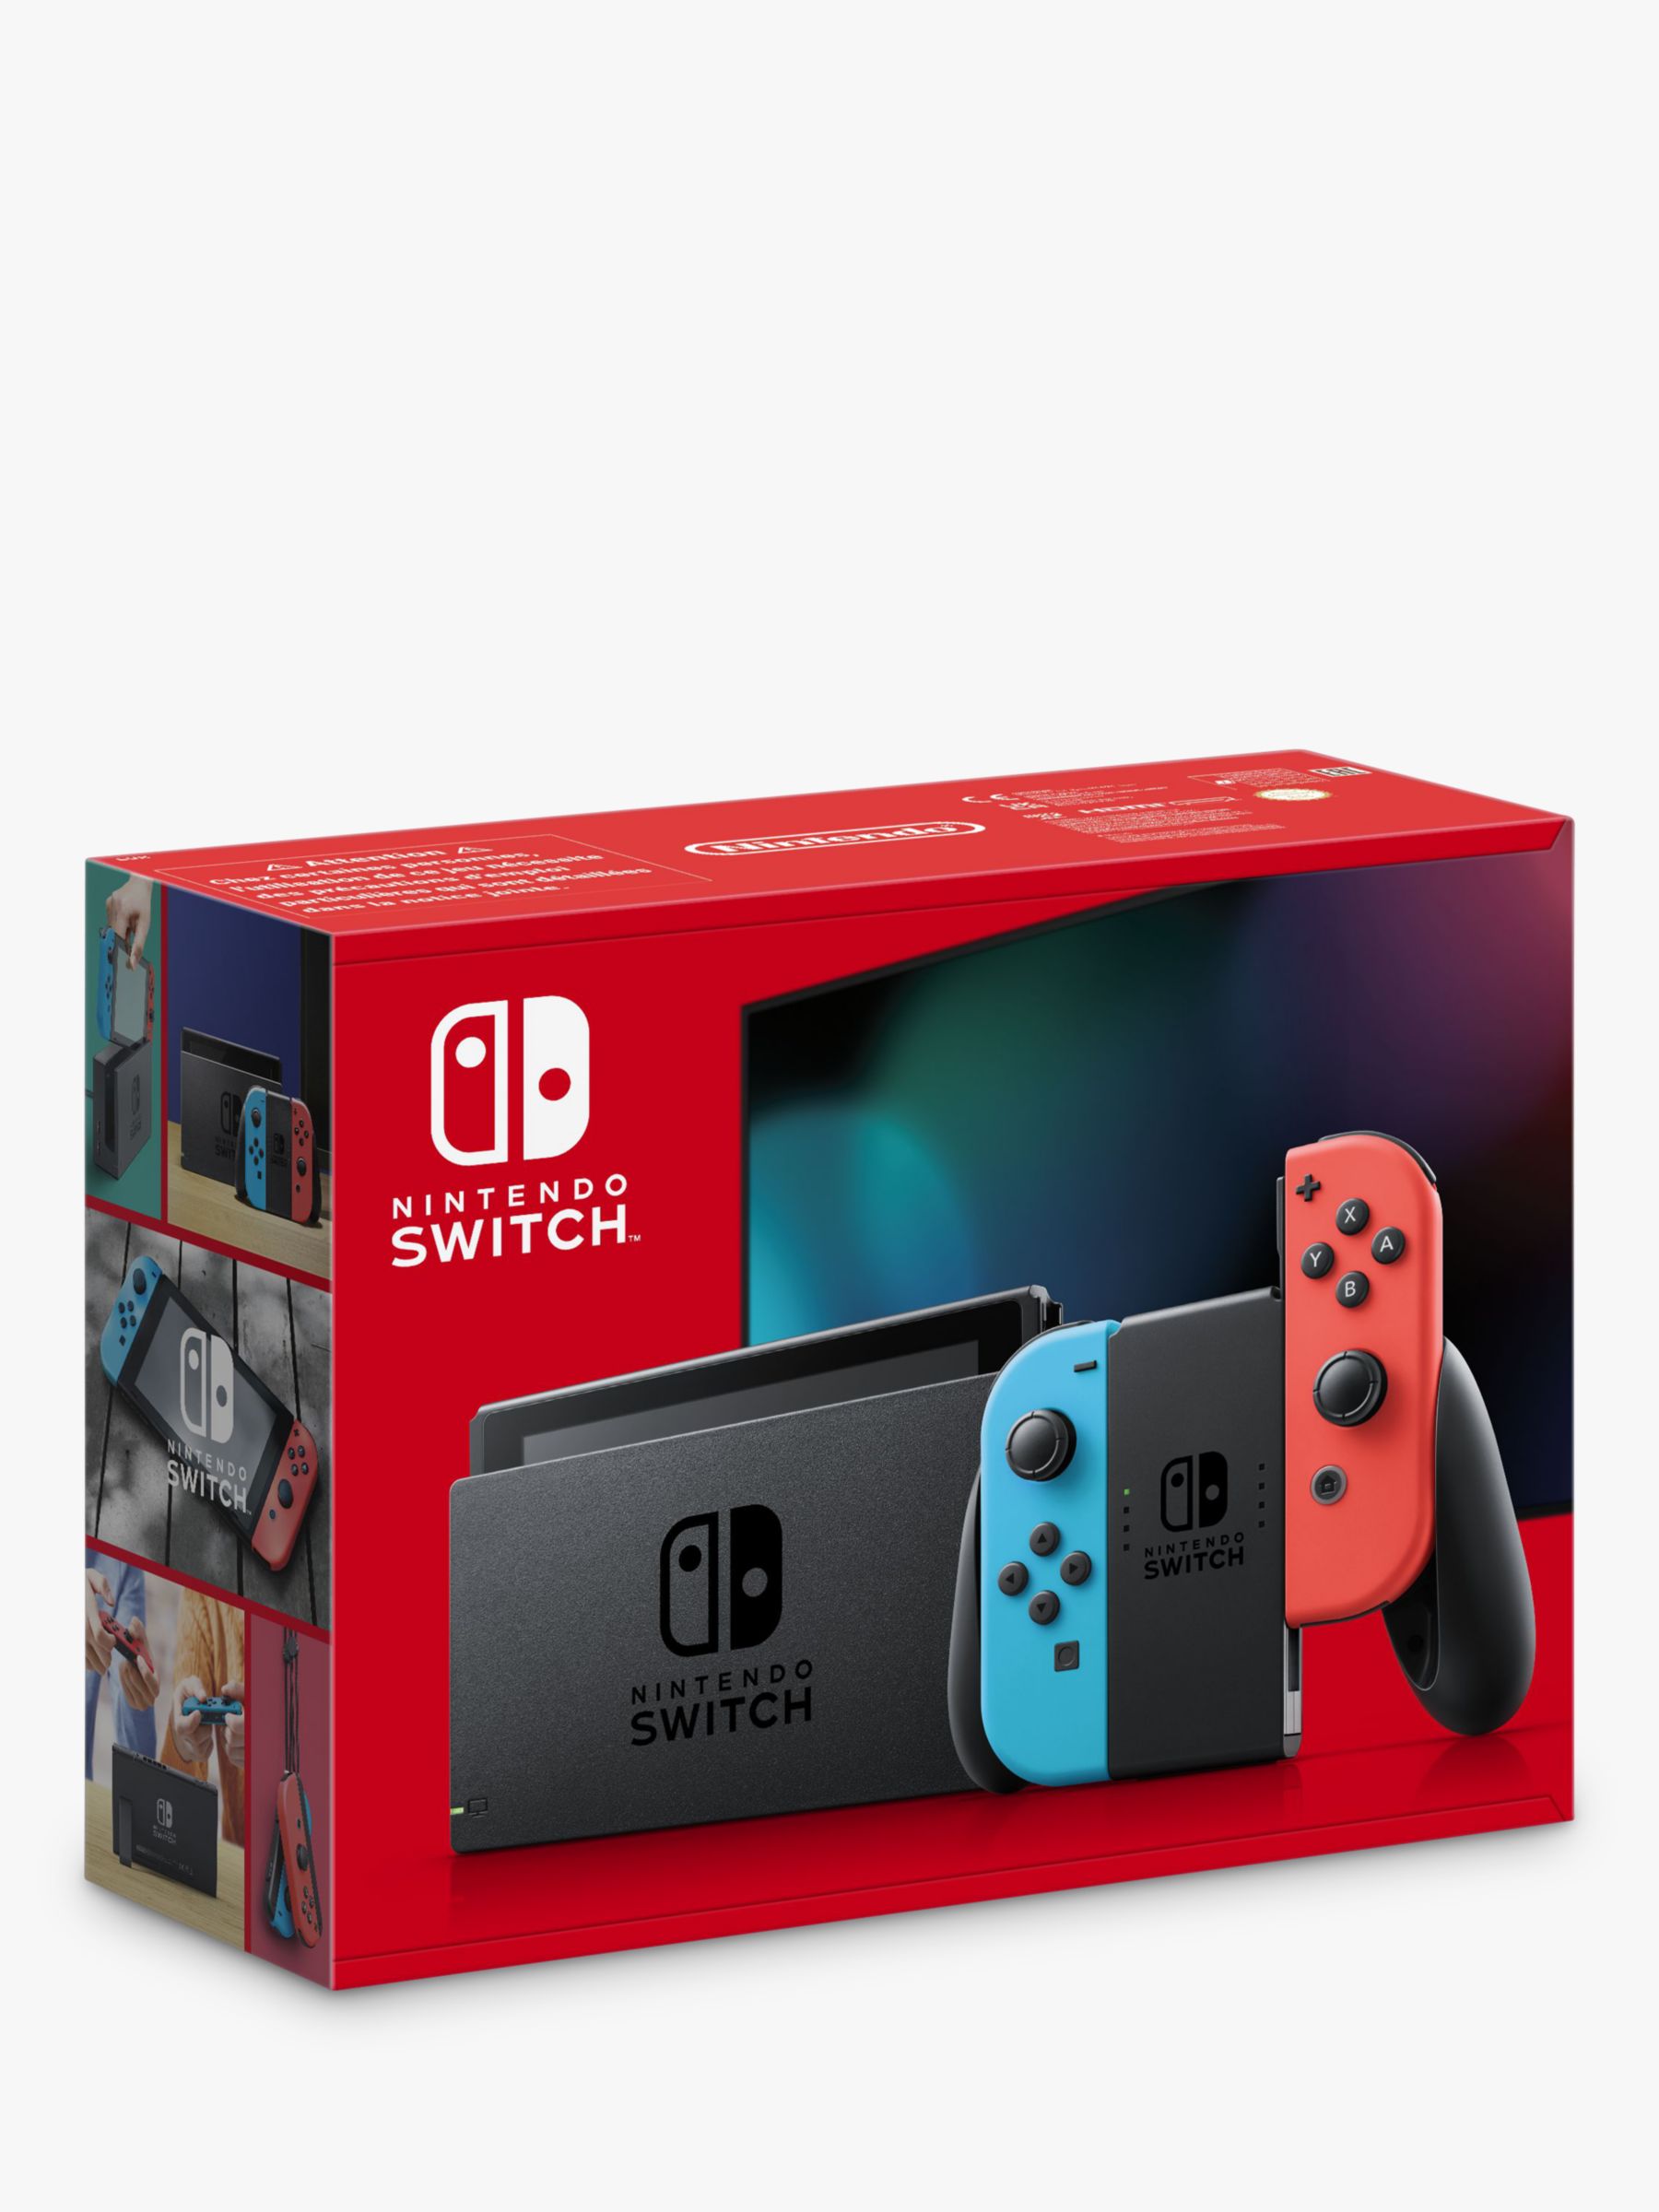 Nintendo Switch 1.1 32GB Console with Joy-Con, Neon Red & Blue